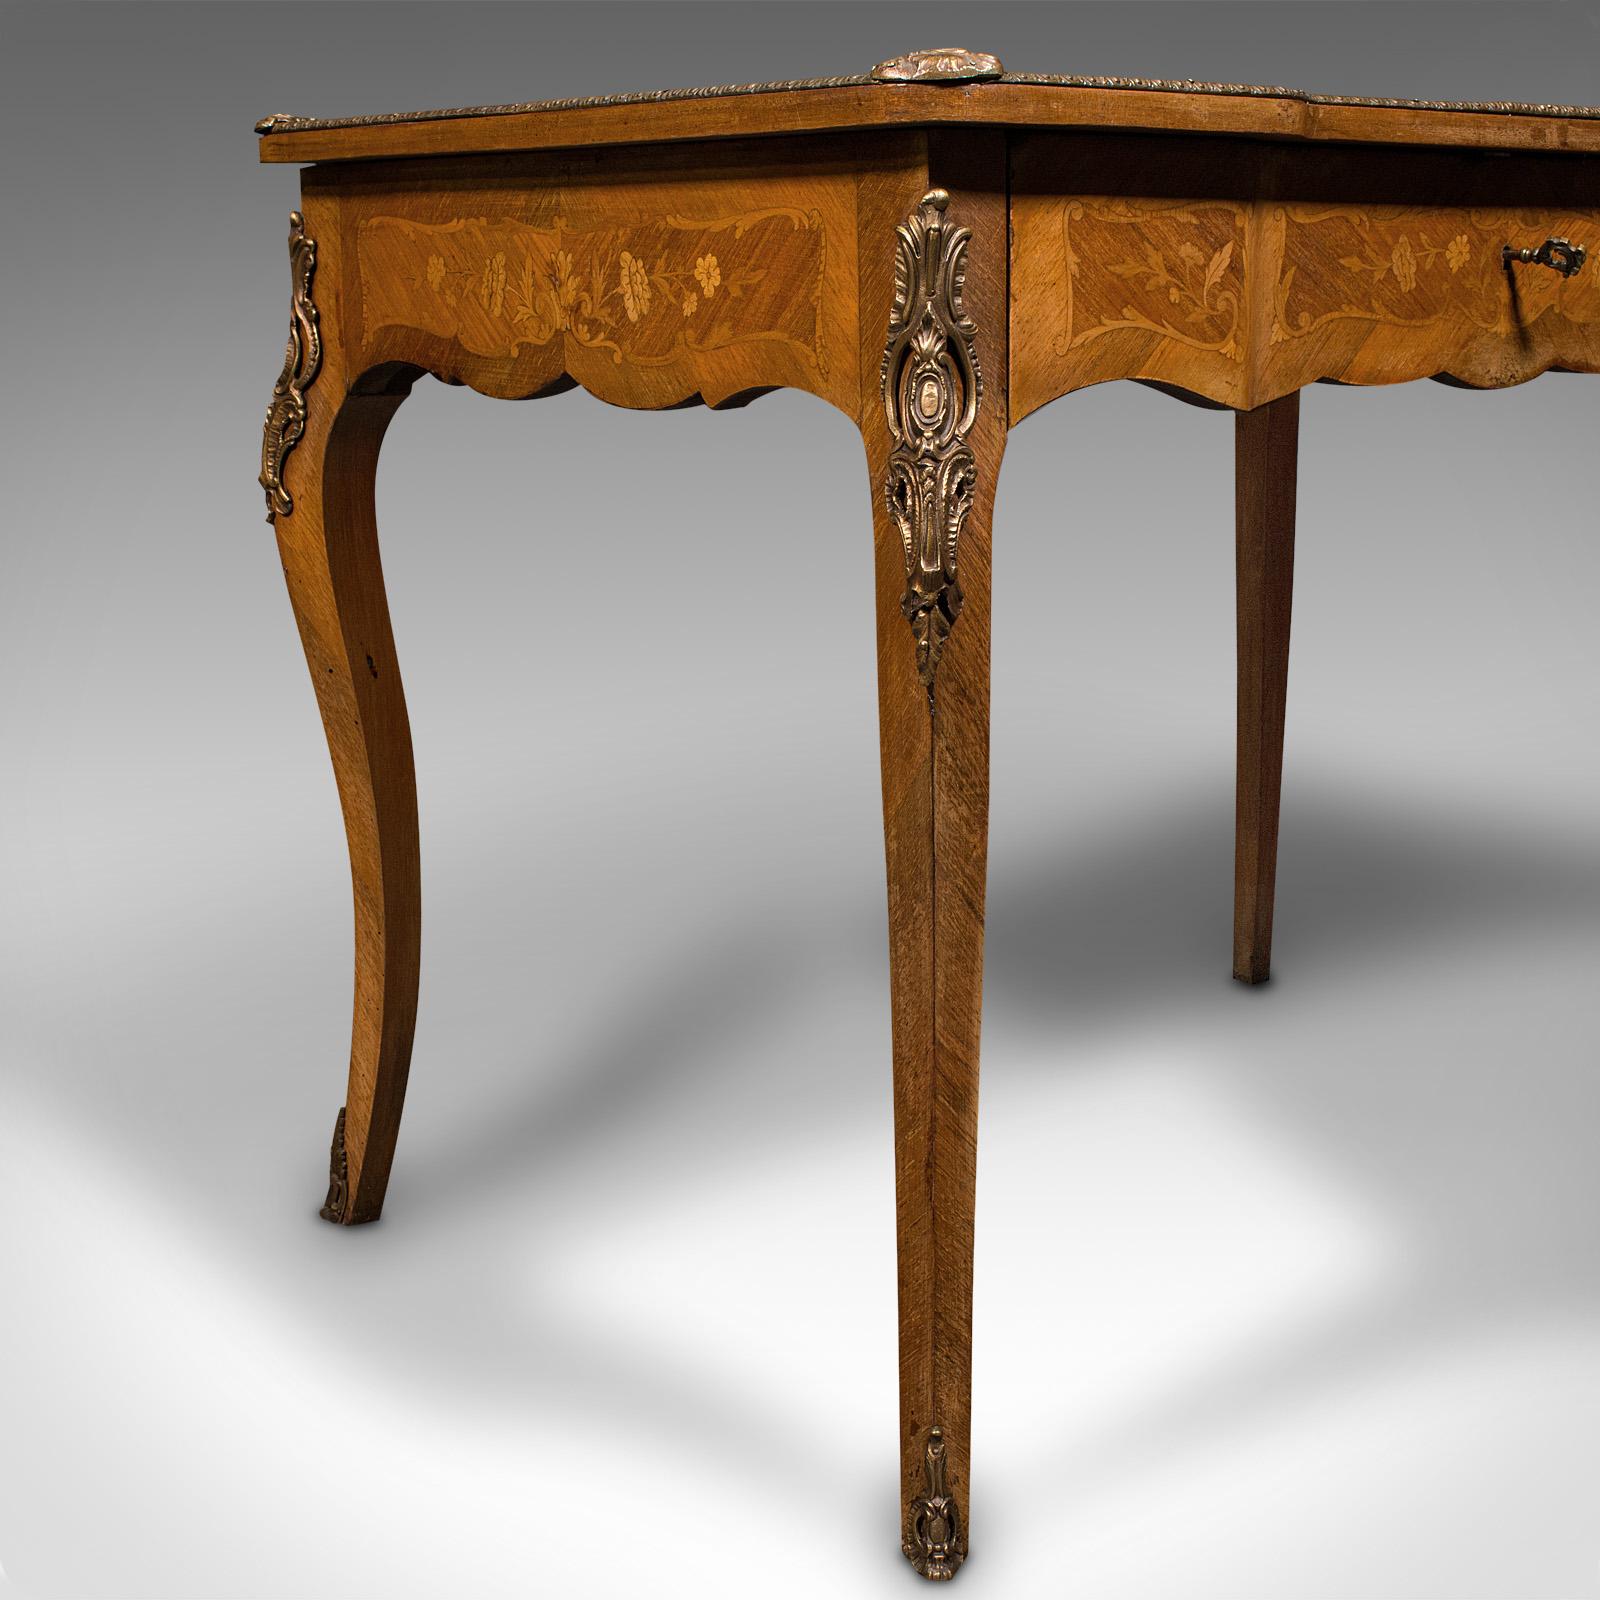 Antique Writing Desk, French, Decorative Centre Table, Louis XV Taste, Victorian For Sale 6